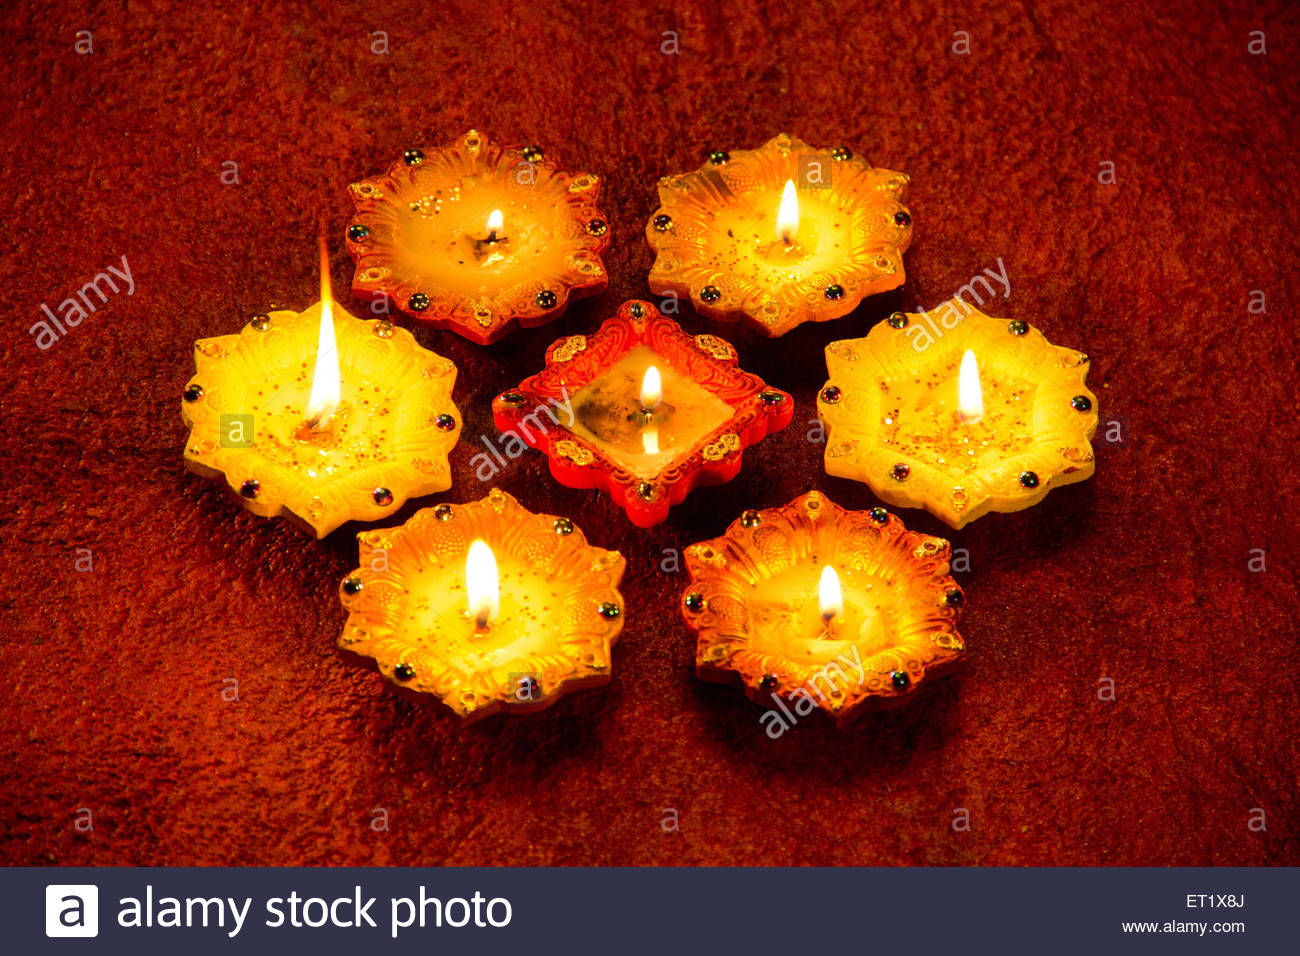 Decorative And Traditional Illuminated Diwali Lamps On Red